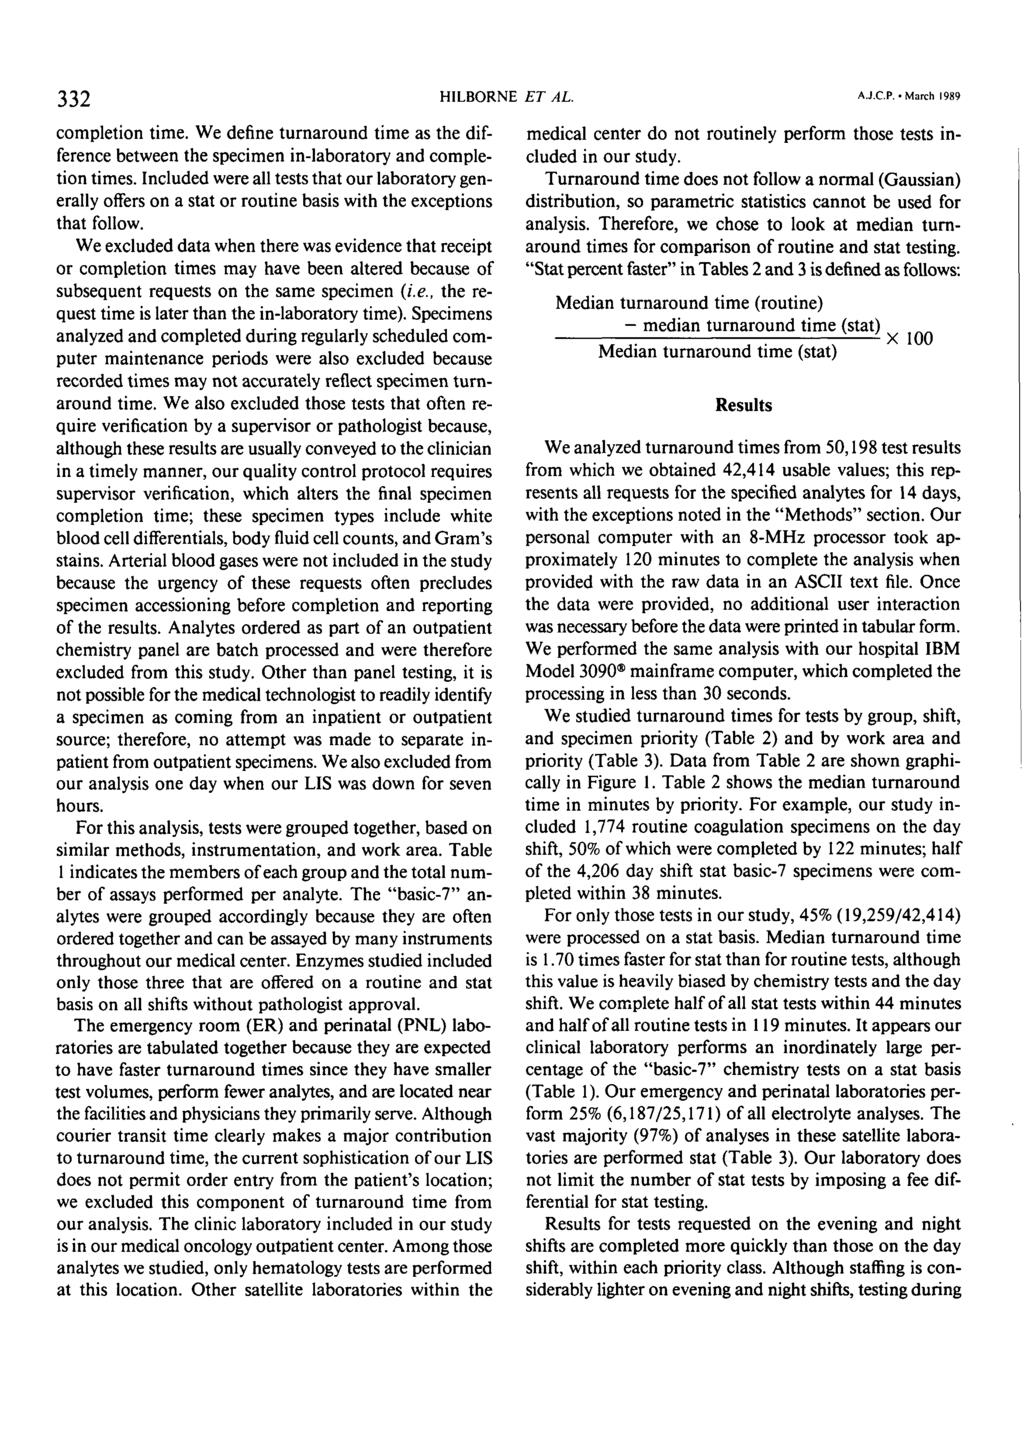 332 HILBORNE ET AL. A.J..P. March 1989 completion time. We define turnaround time as the difference between the specimen in-laboratory and completion times.